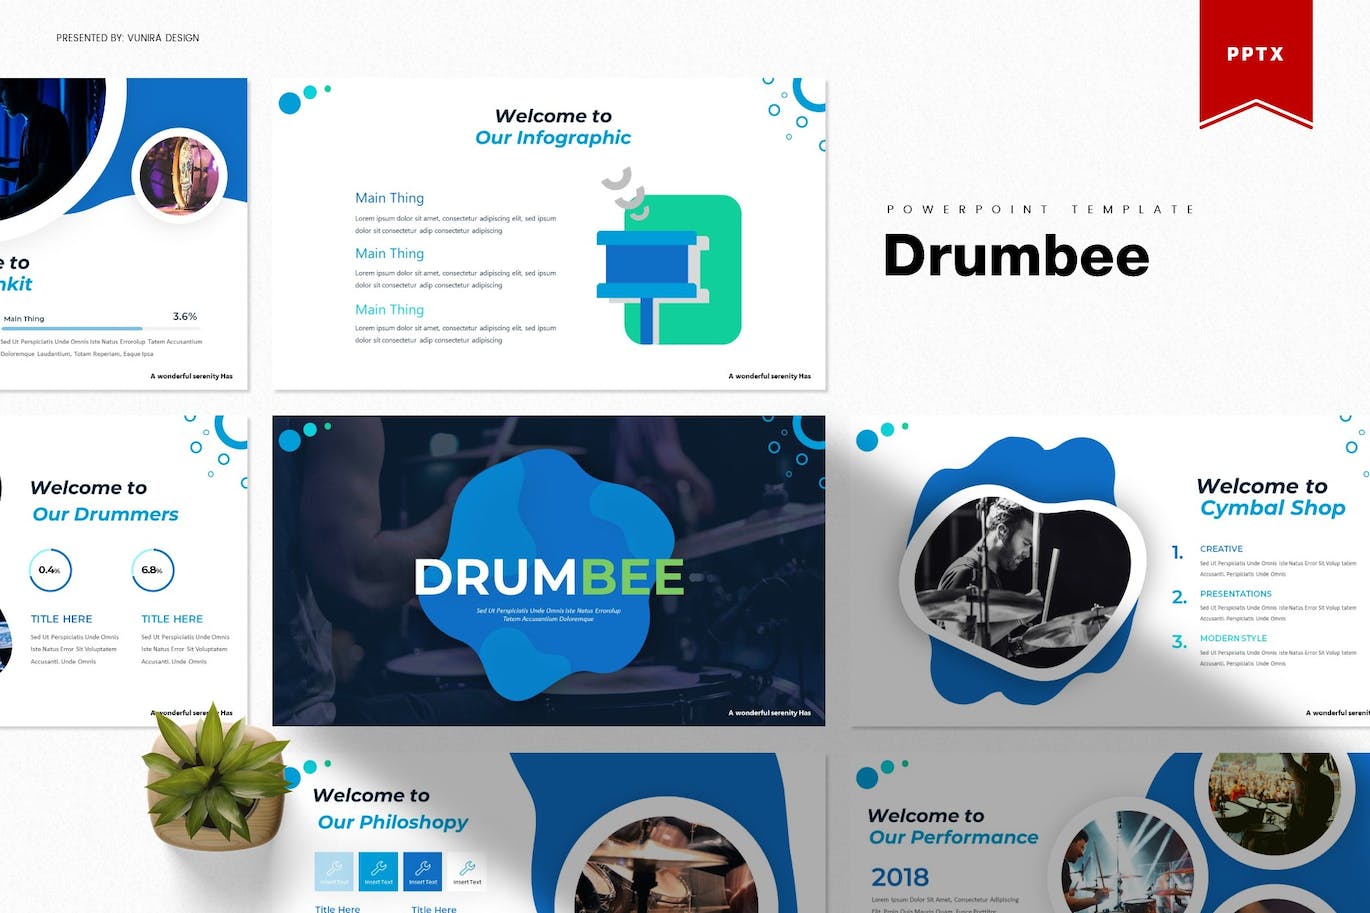 A selection of images of enchanting slide presentation template for musicians.